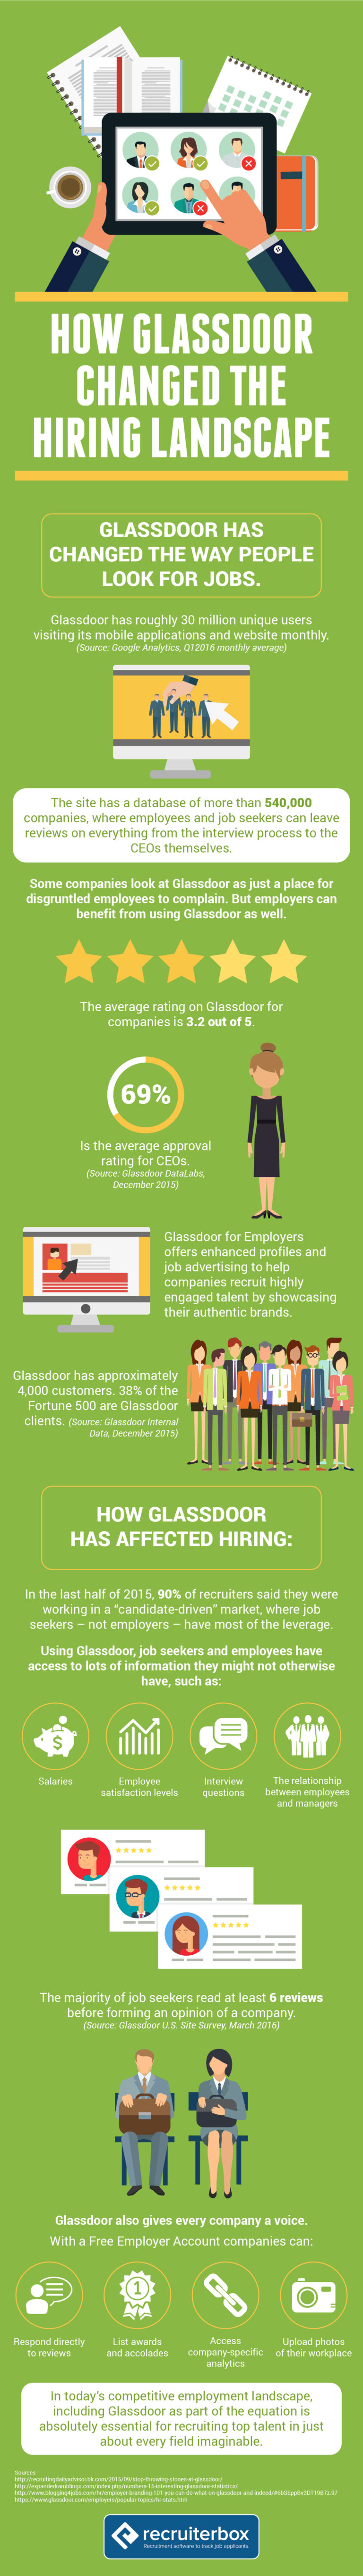 How Glassdoor Changed the Hiring Landscape [Infographic]